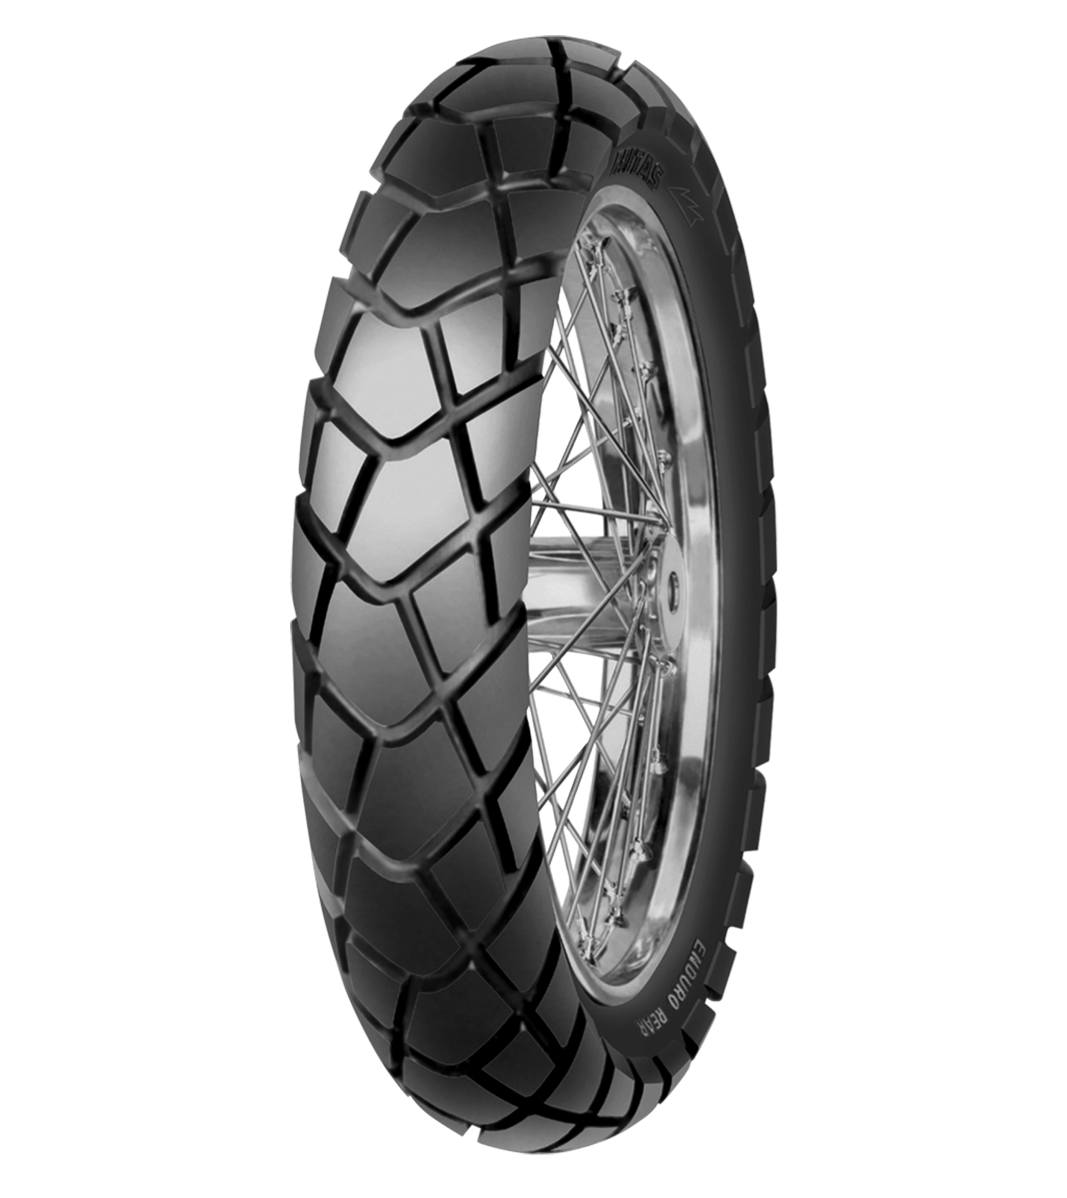 Mitas E-08 ENDURO 130/80-18 Trail ON Trail 72T No Stripe Tubeless Rear Tire, 224414, 130/80-18, Adventure Touring, E Series, E-08 Enduro, Rear, Trail, Trail ON, Tires - Imported and distributed in North &amp; South America by Lindeco Genuine Powersports - Premier Powersports Equipment and Accessories for Motorcycle Enthusiasts, Professional Riders and Dealers.